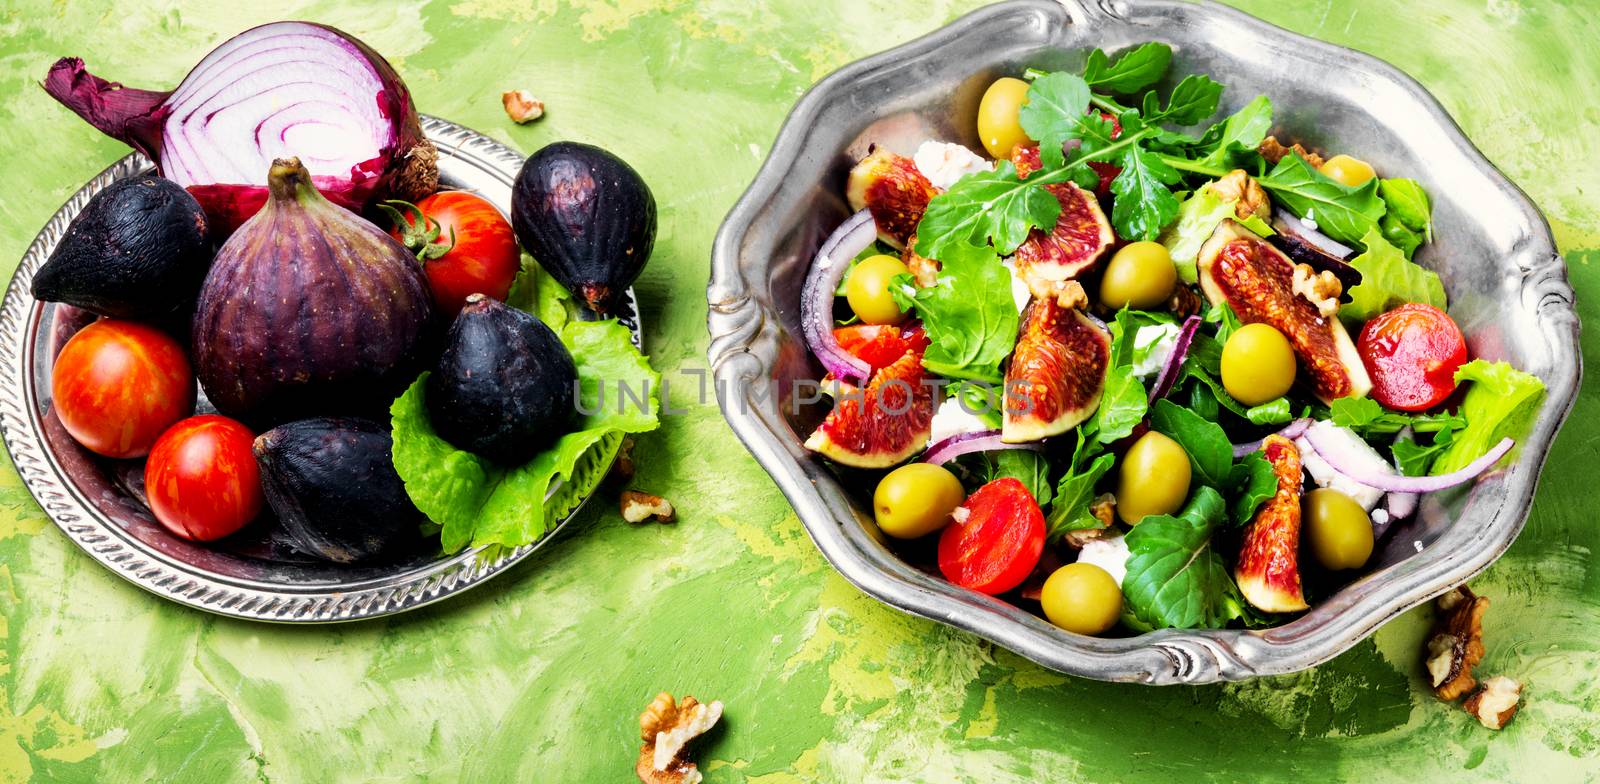 Autumn salad with arugula,olive, figs and cheese.Healthy food